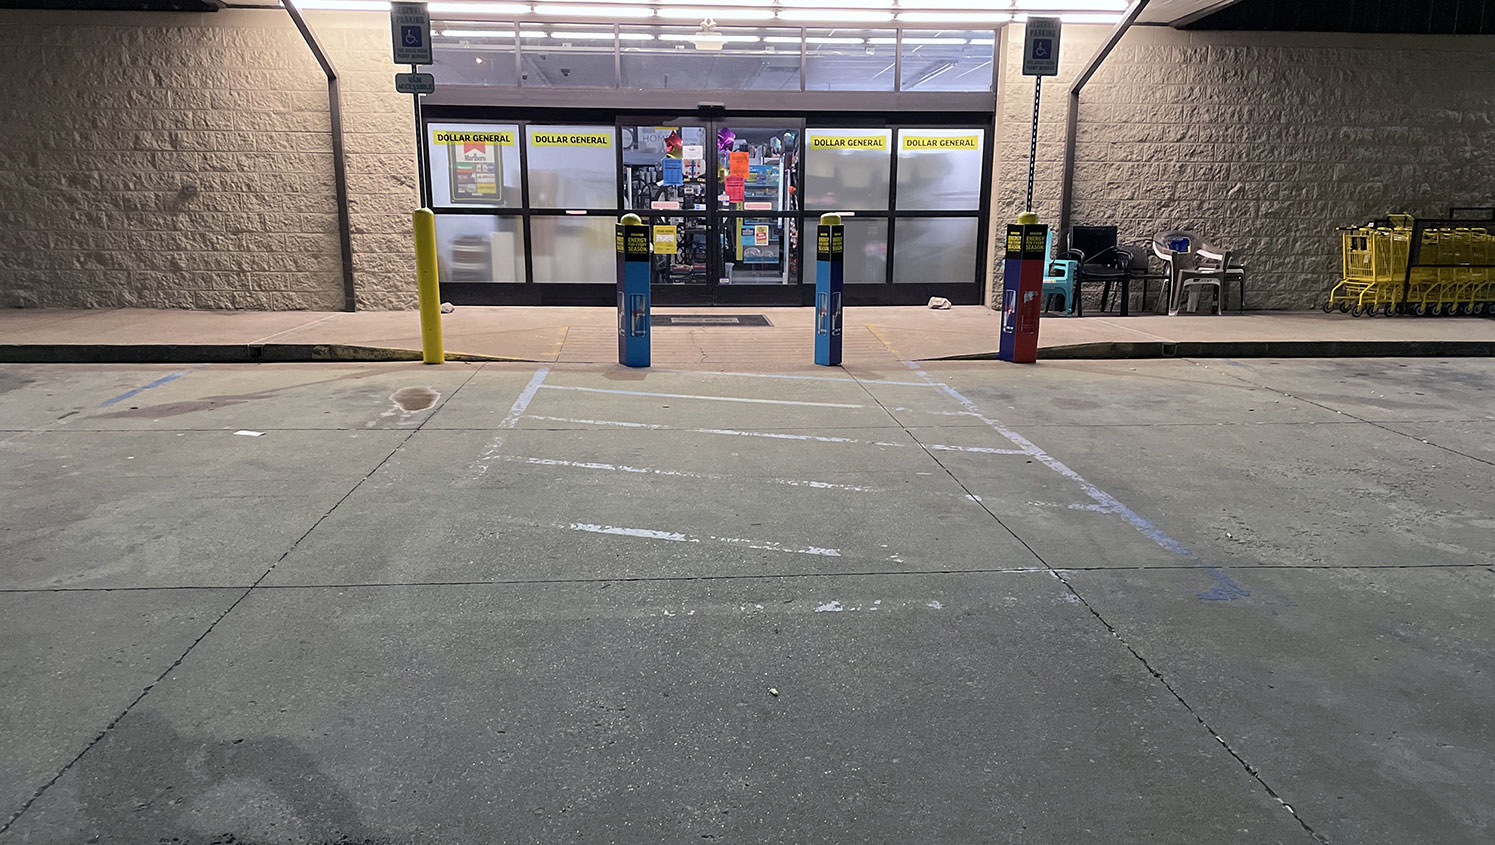 Check Out This New Dollar General Parking Lot | G-FORCE™ Louisville